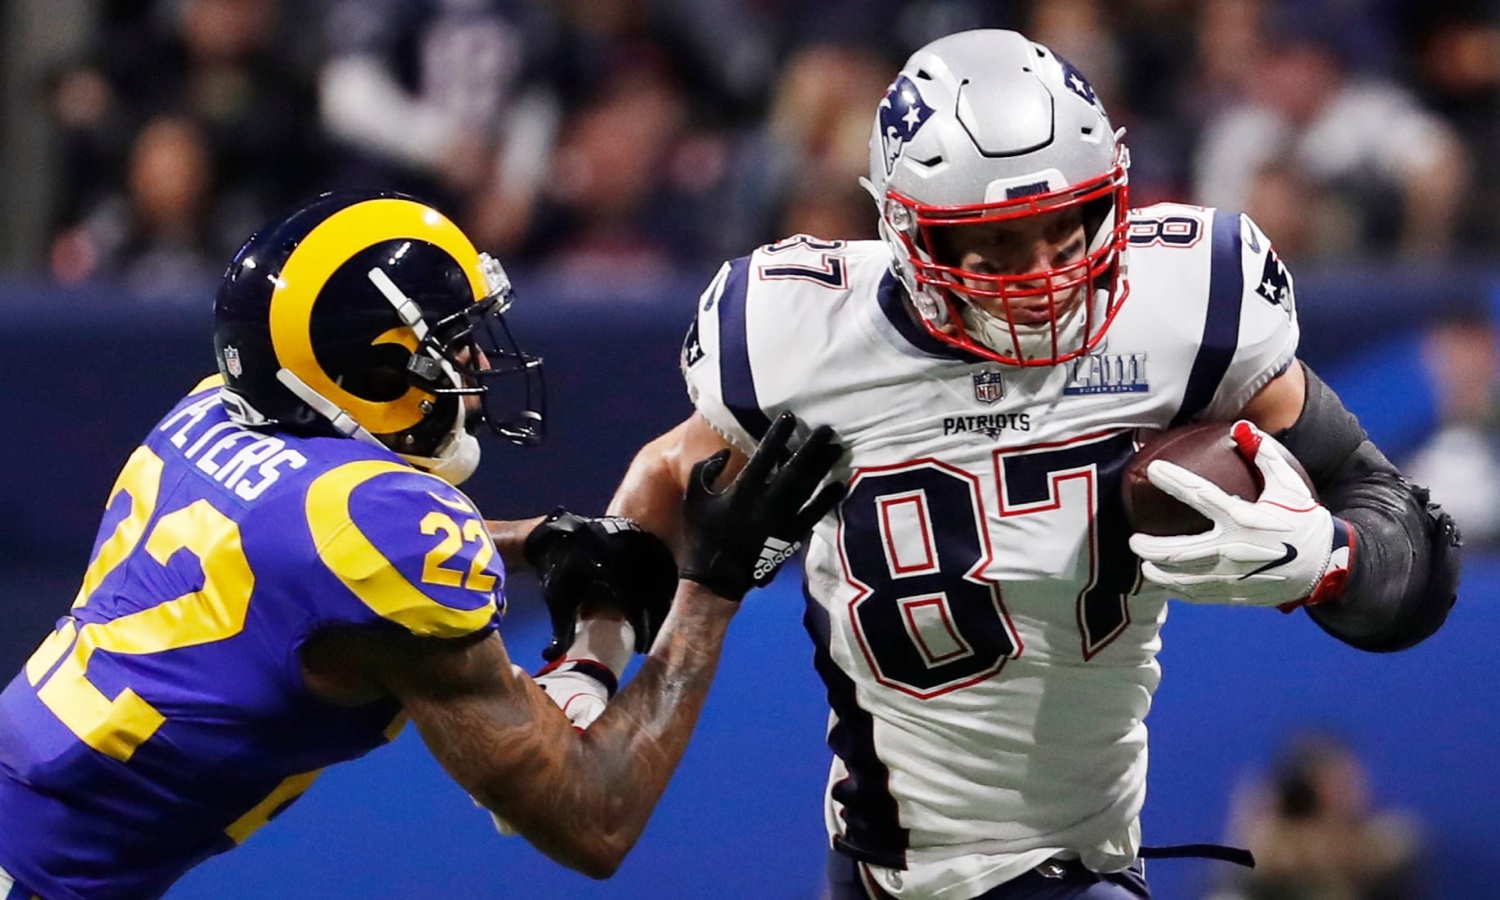 Rob Gronkowski is a three-time Super Bowl champion who has been one of the most dominant players at his position. Photograph: Kevin Lamarque/Reuters